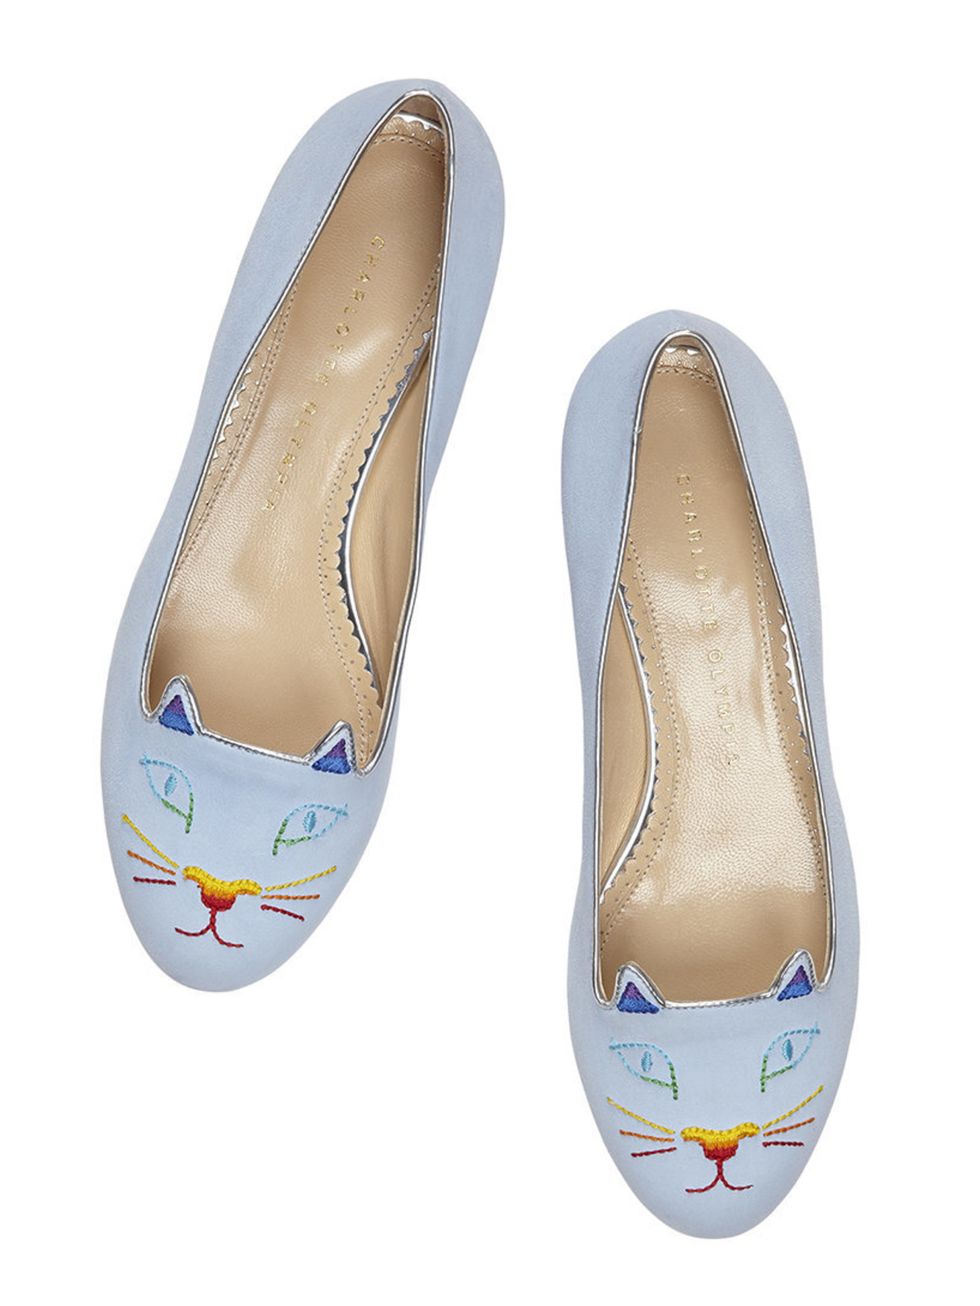 &lt;p&gt;Charlotte Olympia for Silver Linings&lt;/p&gt;